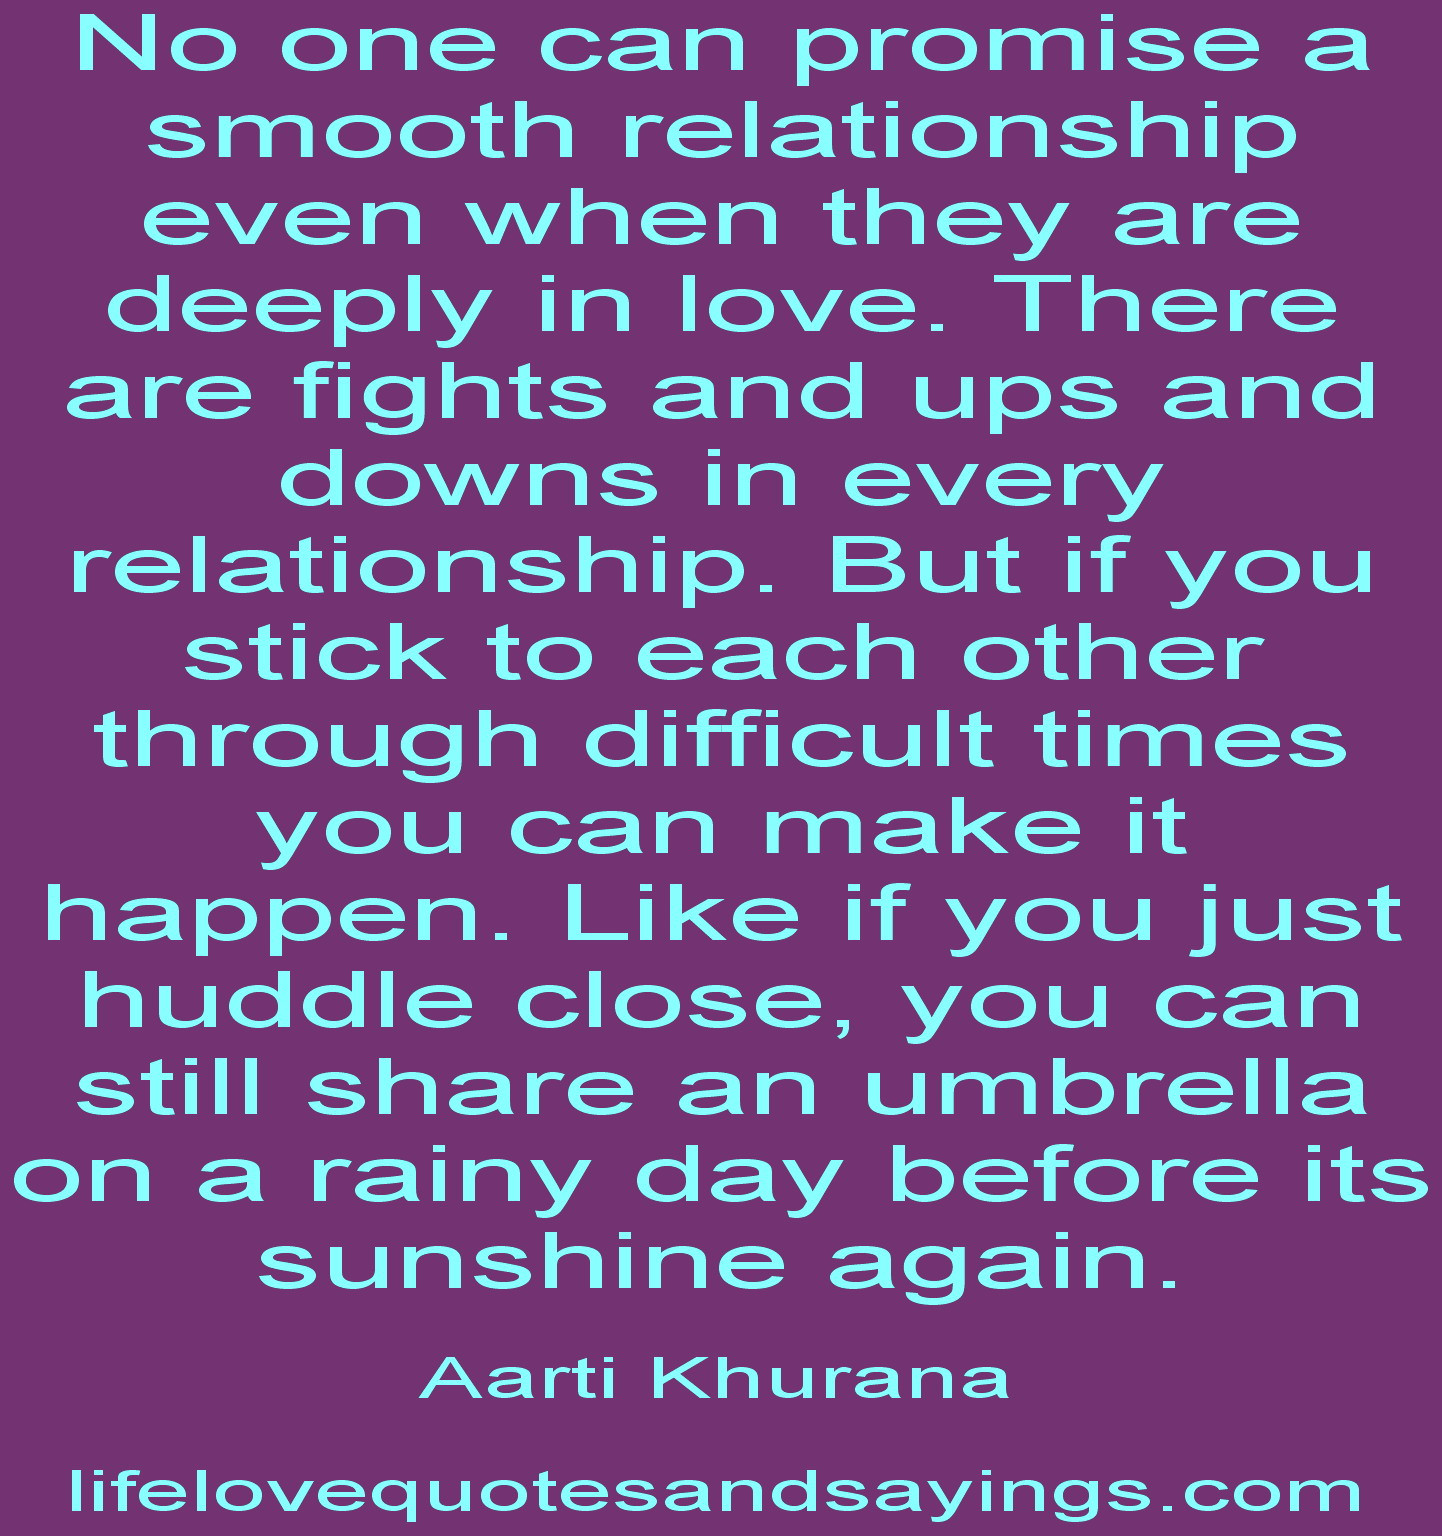 Ups And Downs Relationship Quotes
 Ups And Downs Love Quotes QuotesGram